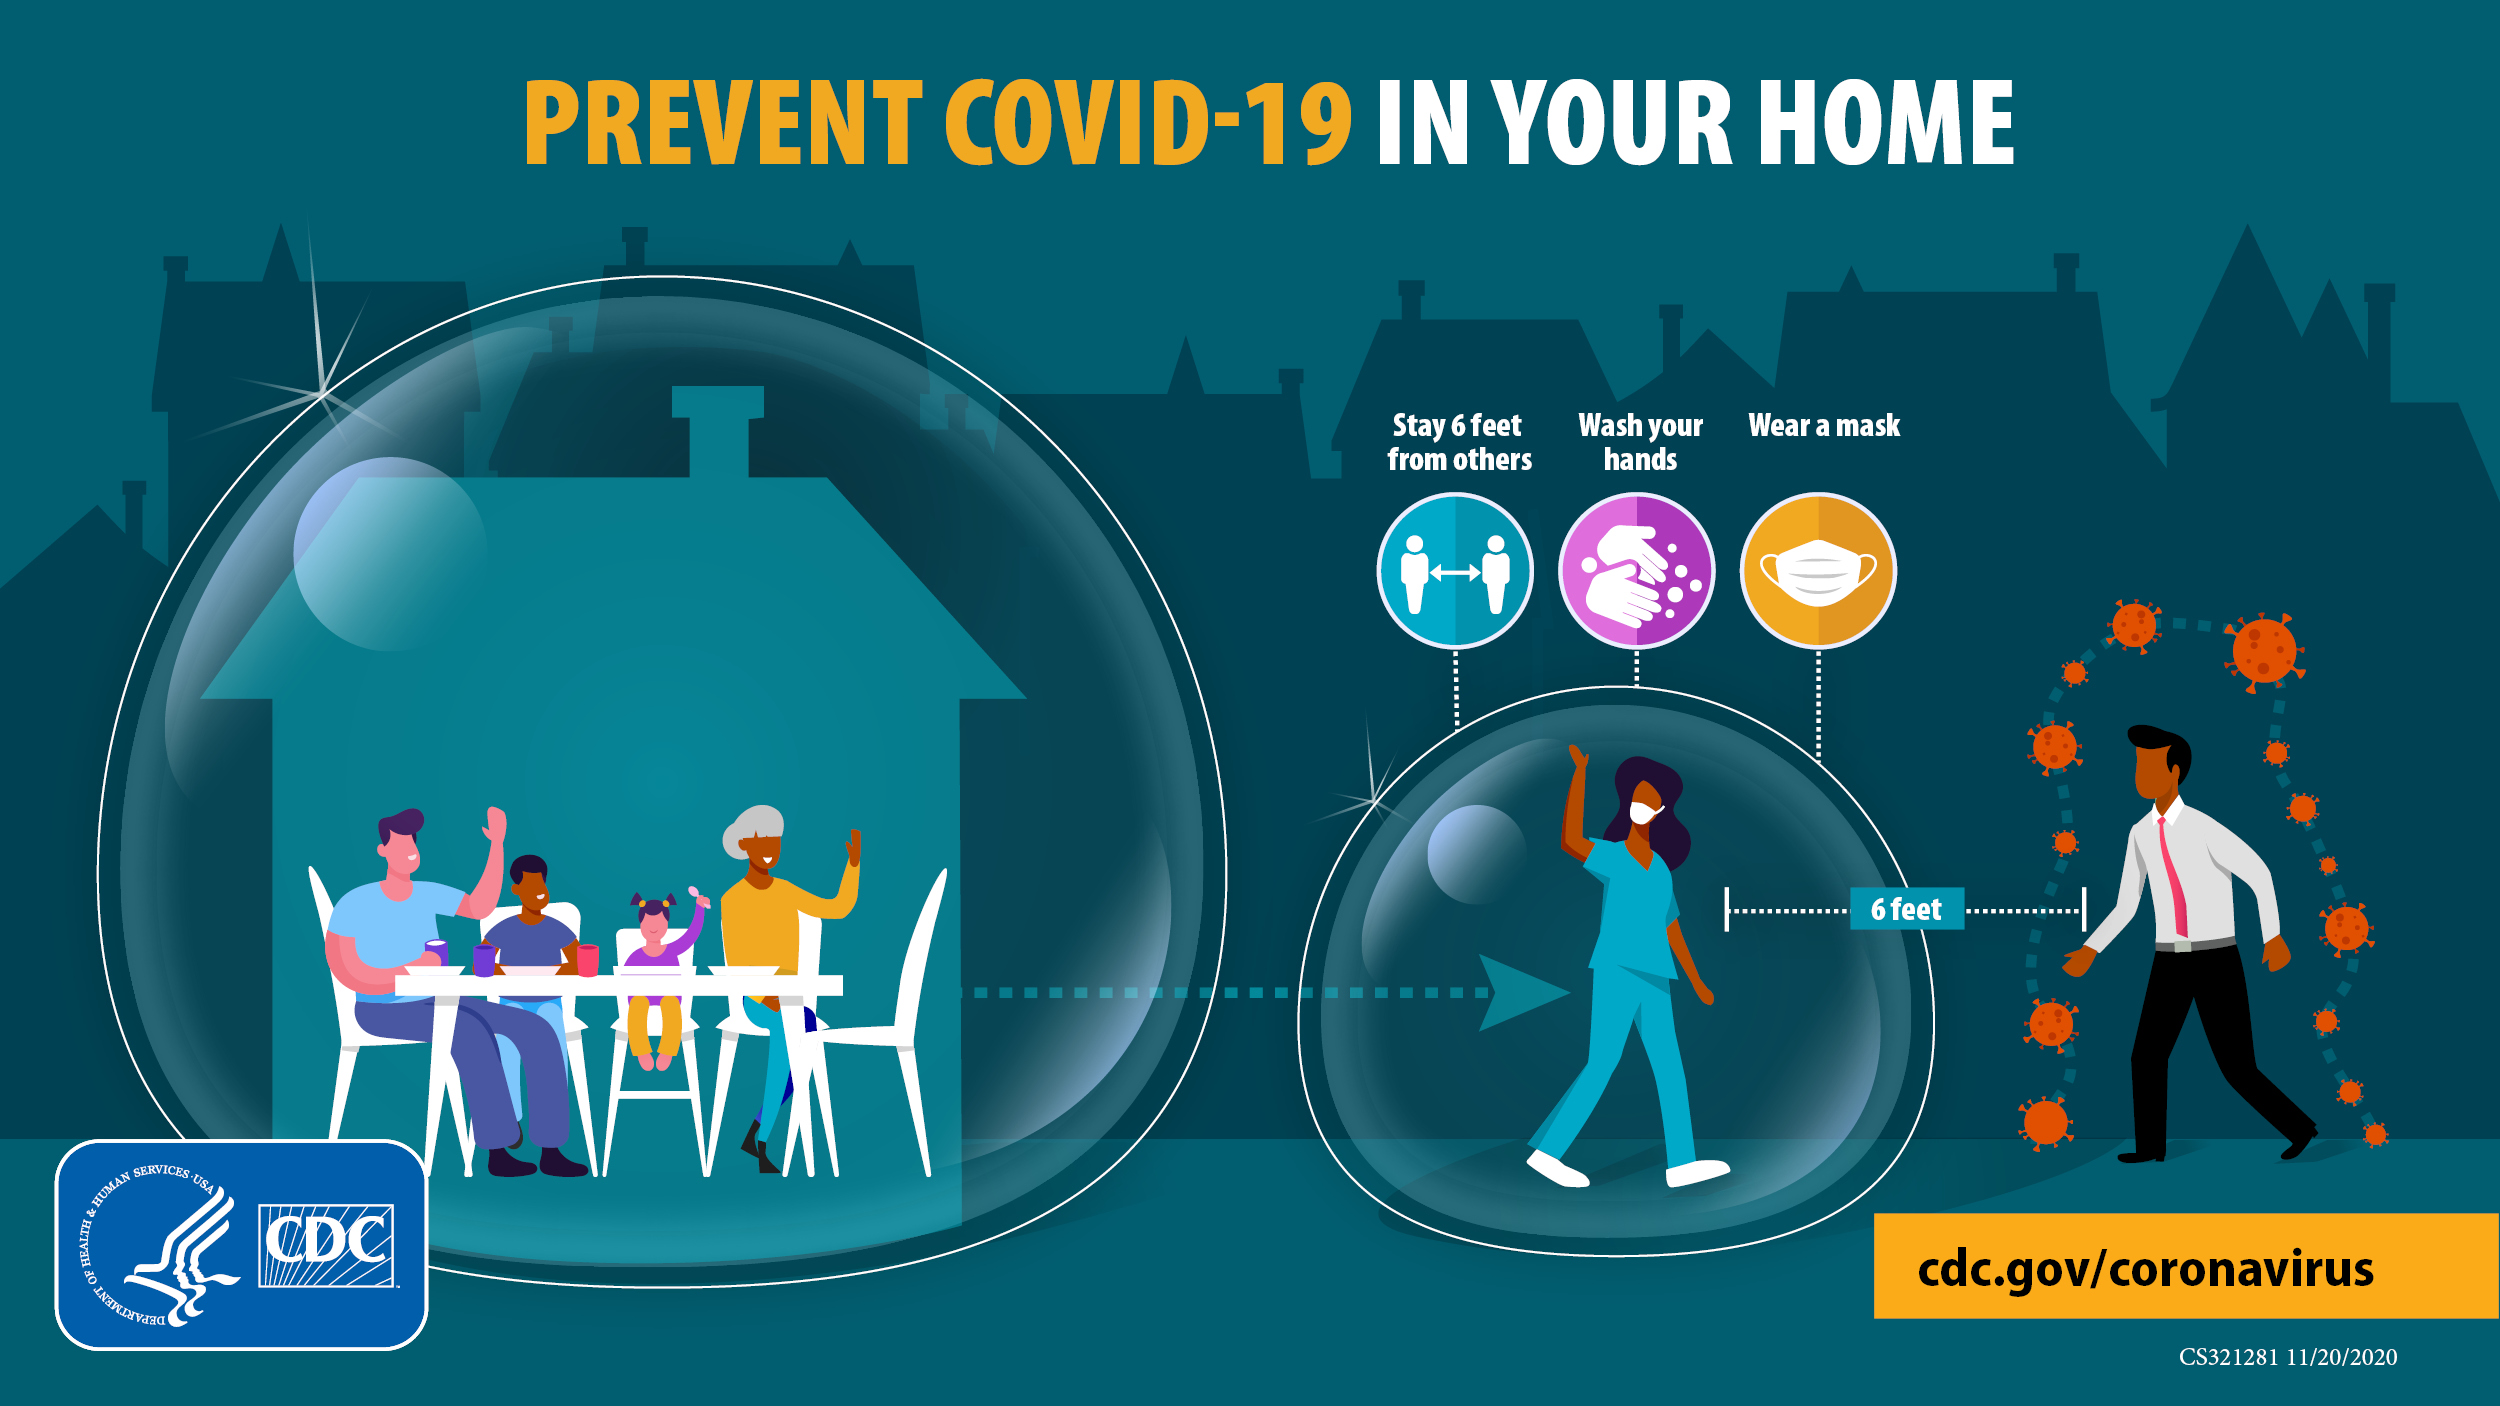 Wear a mask, wash your hands, and stay 6 feet apart to protect yourself and prevent bringing COVID-19 into your home.